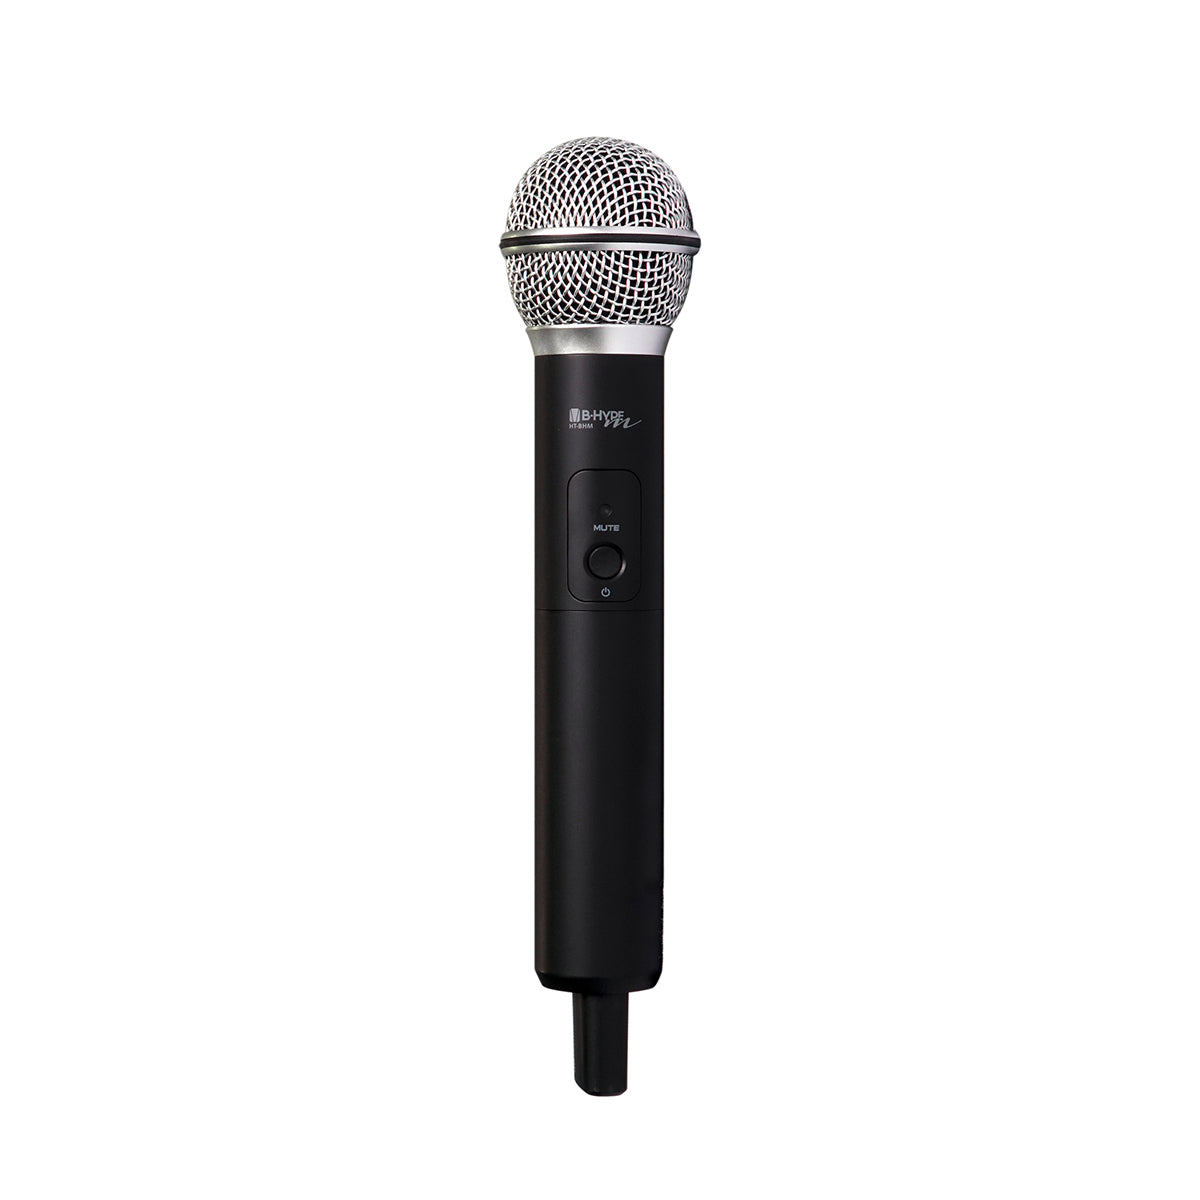 dB Technologies B-Hype Mobile 2 way active speaker with Handheld Microphone